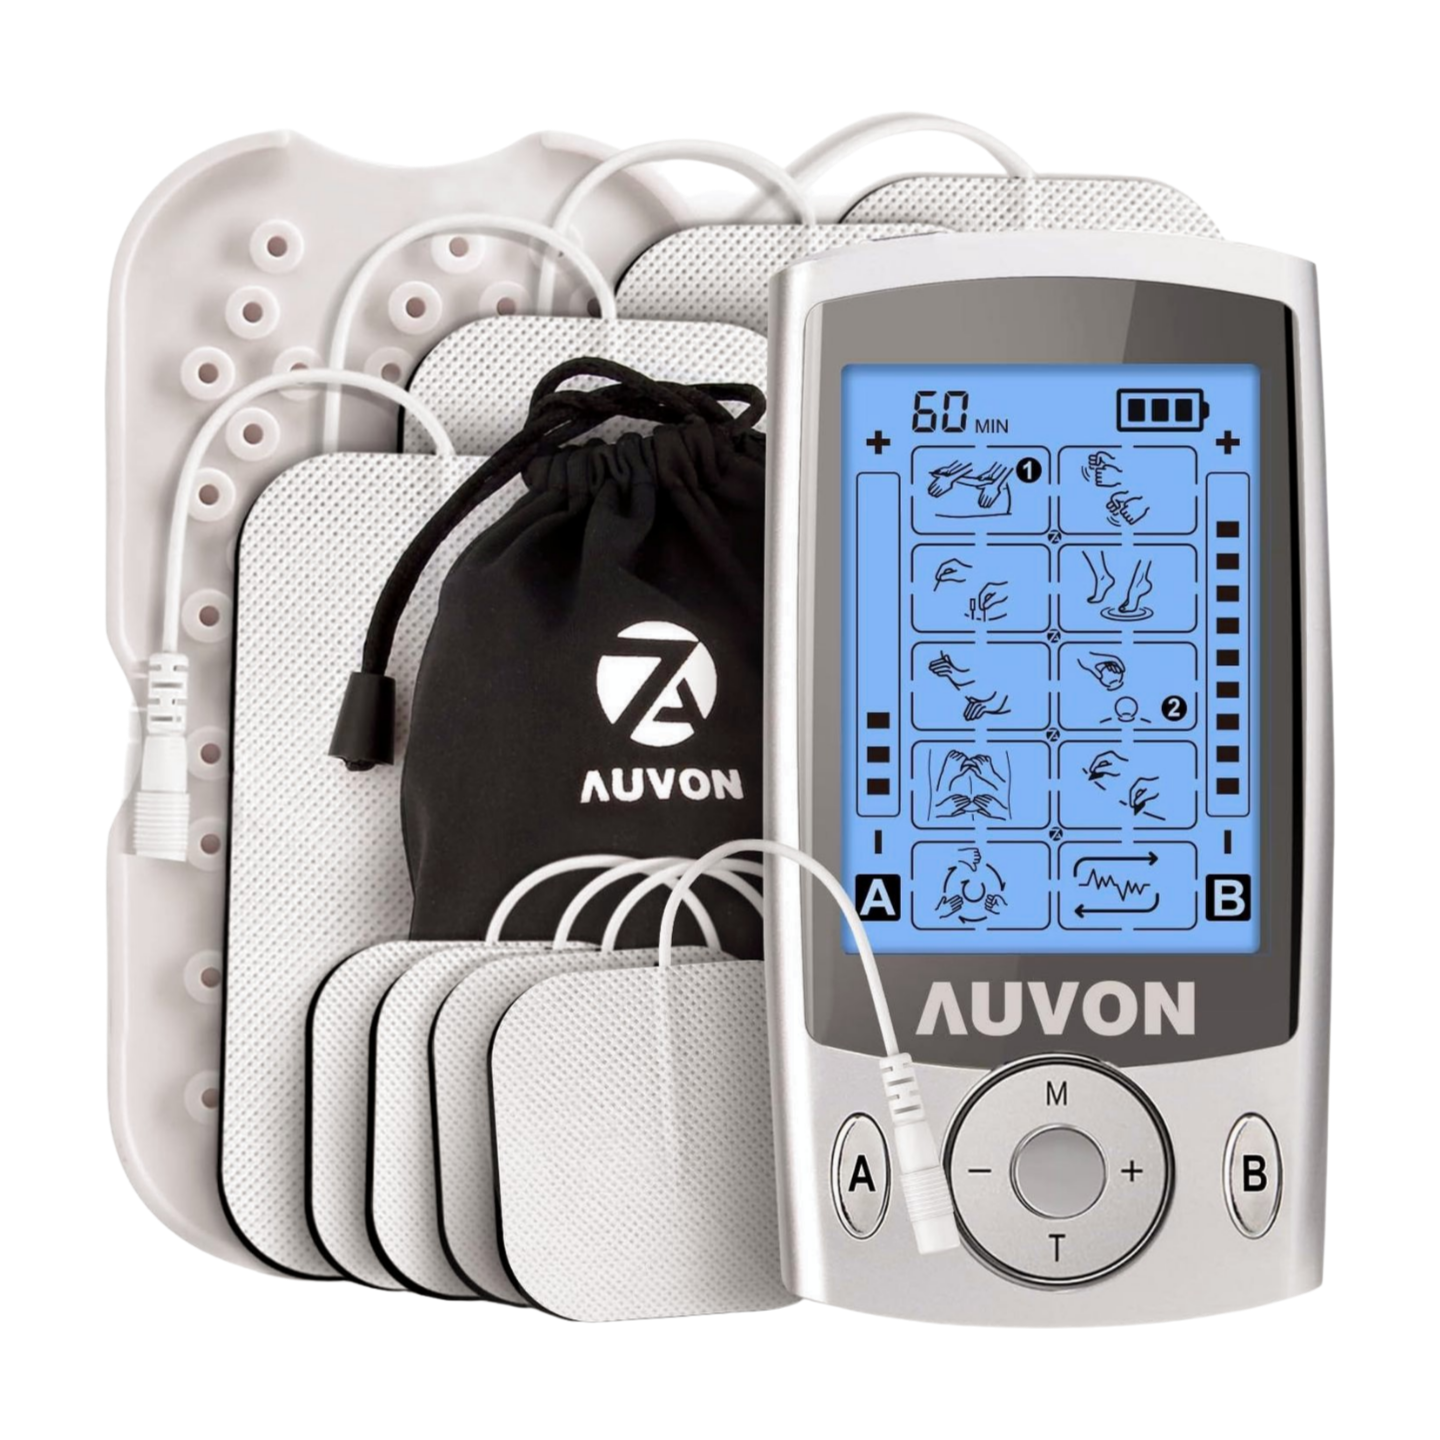 AUVON Rechargeable TENS Unit: The Life-Saving Device You Need to Know About!